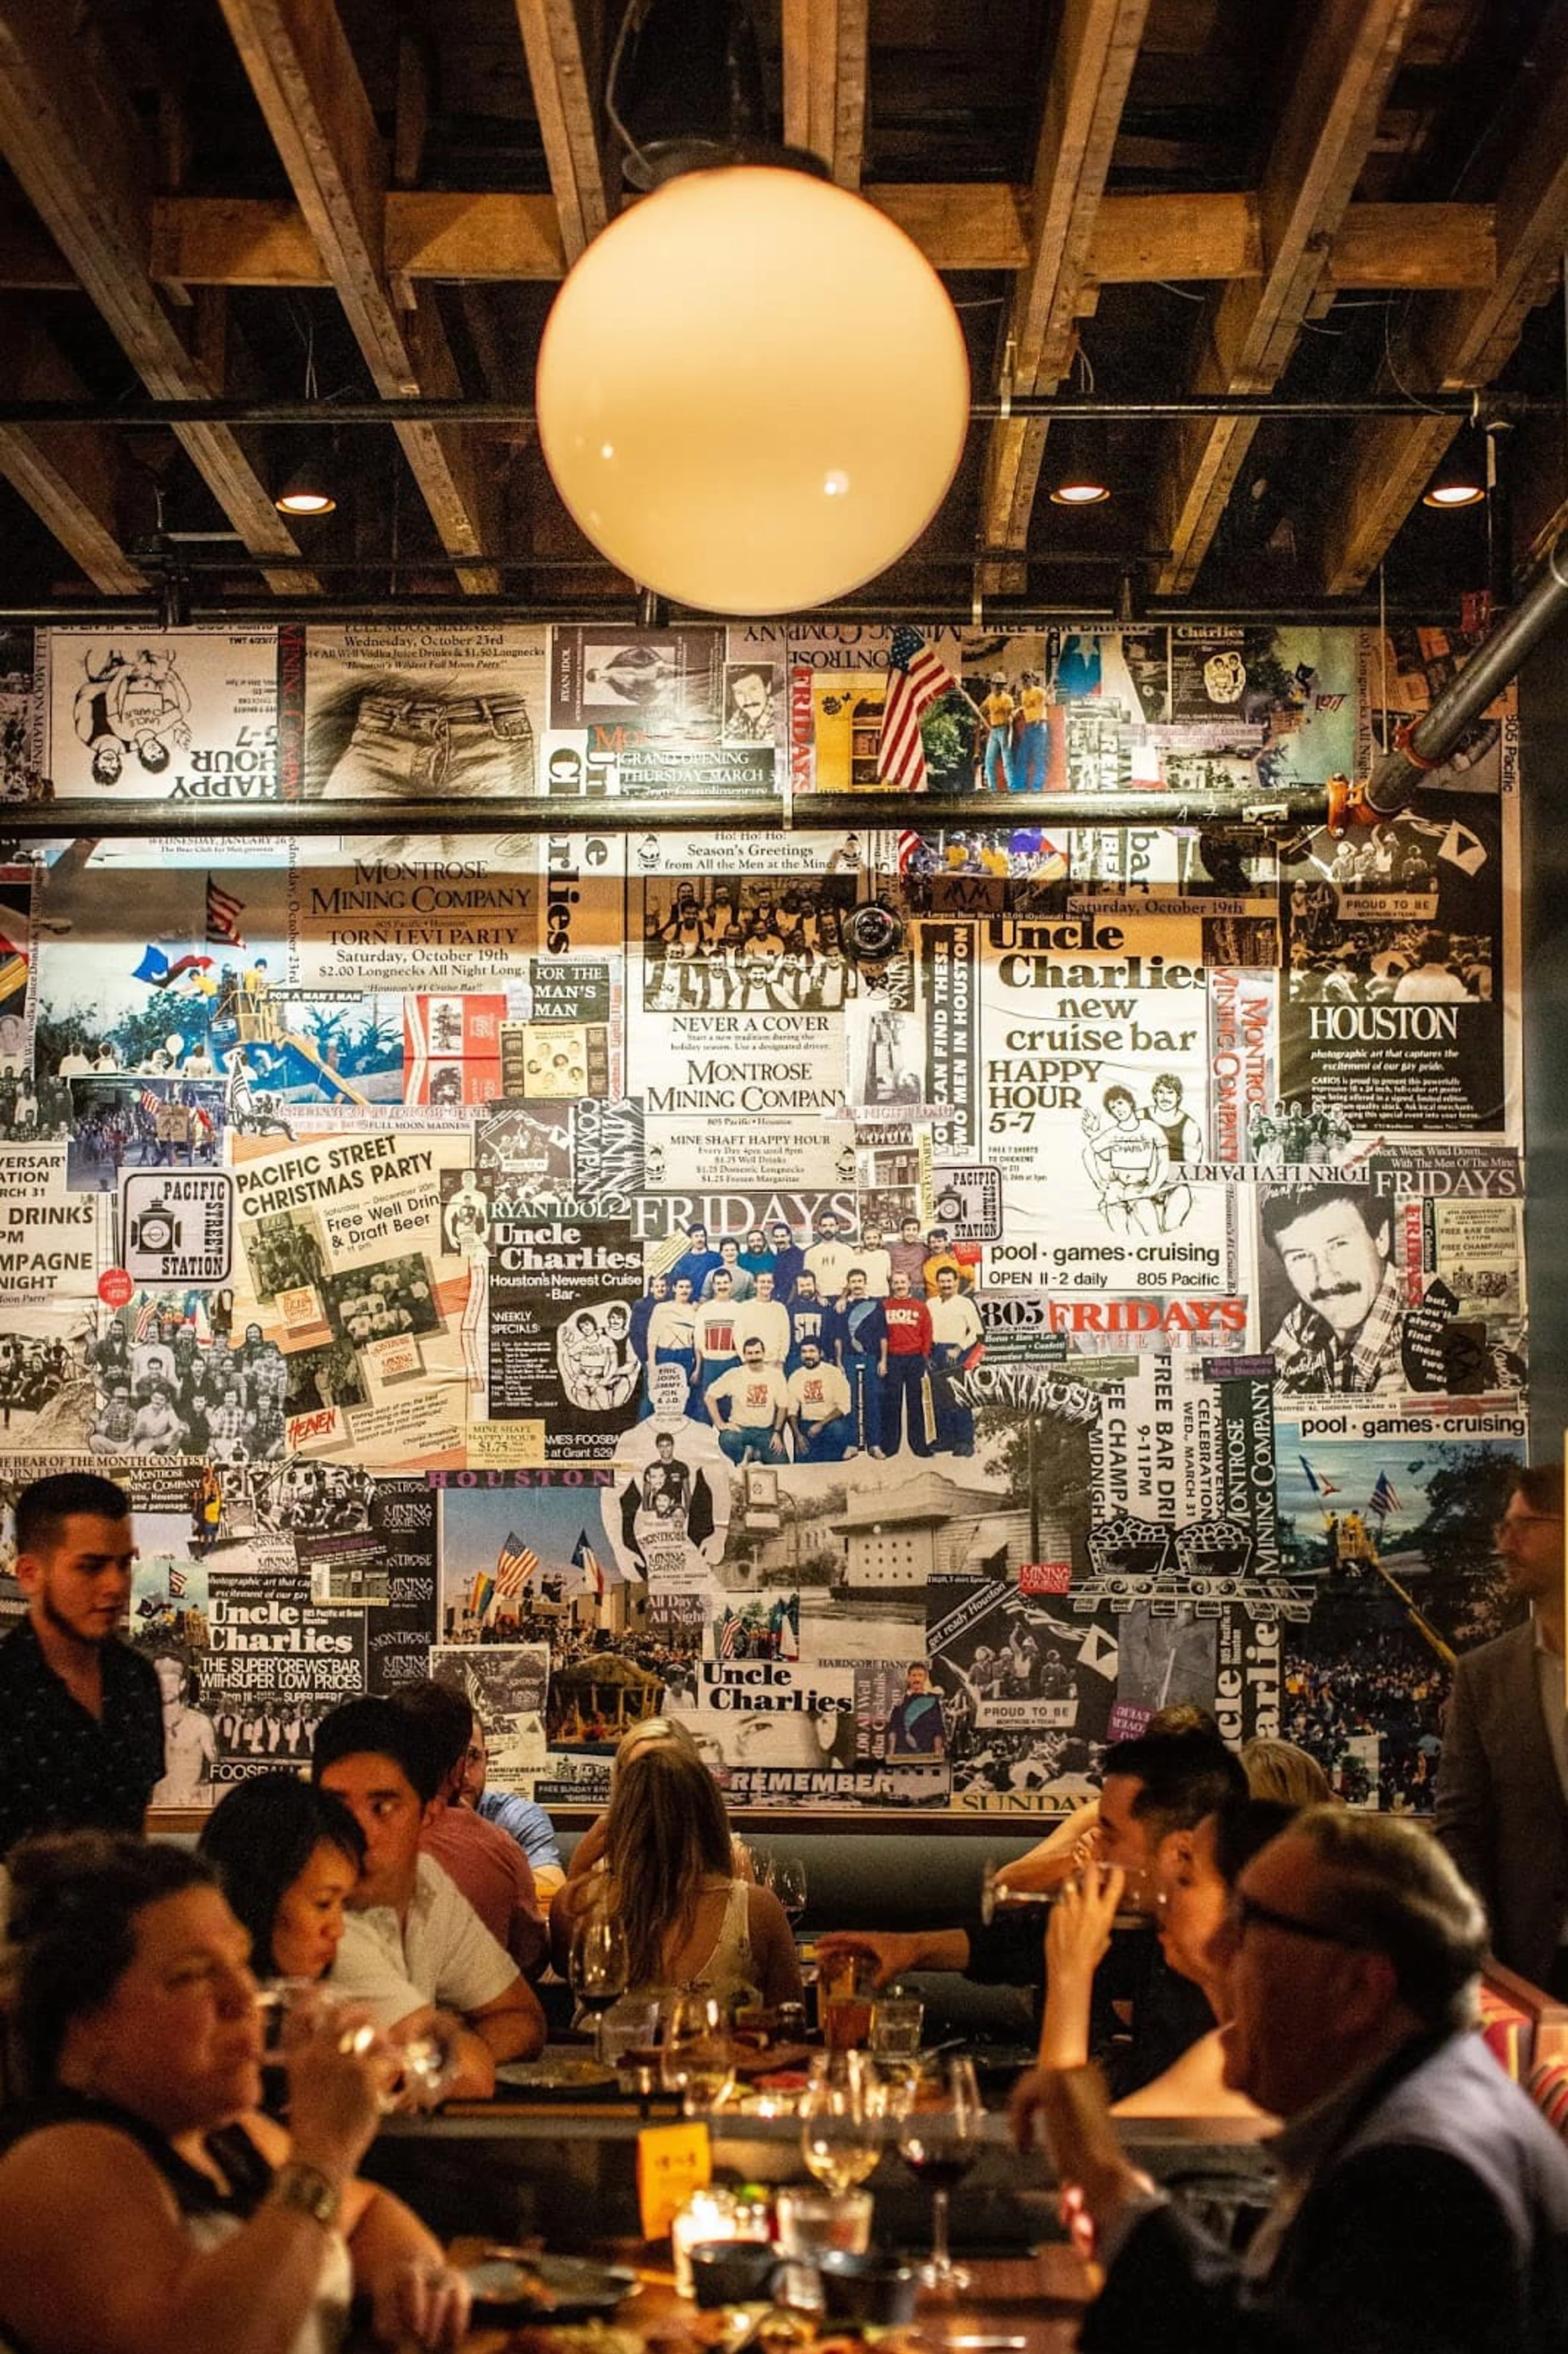 A busy restaurant with a collage art wall